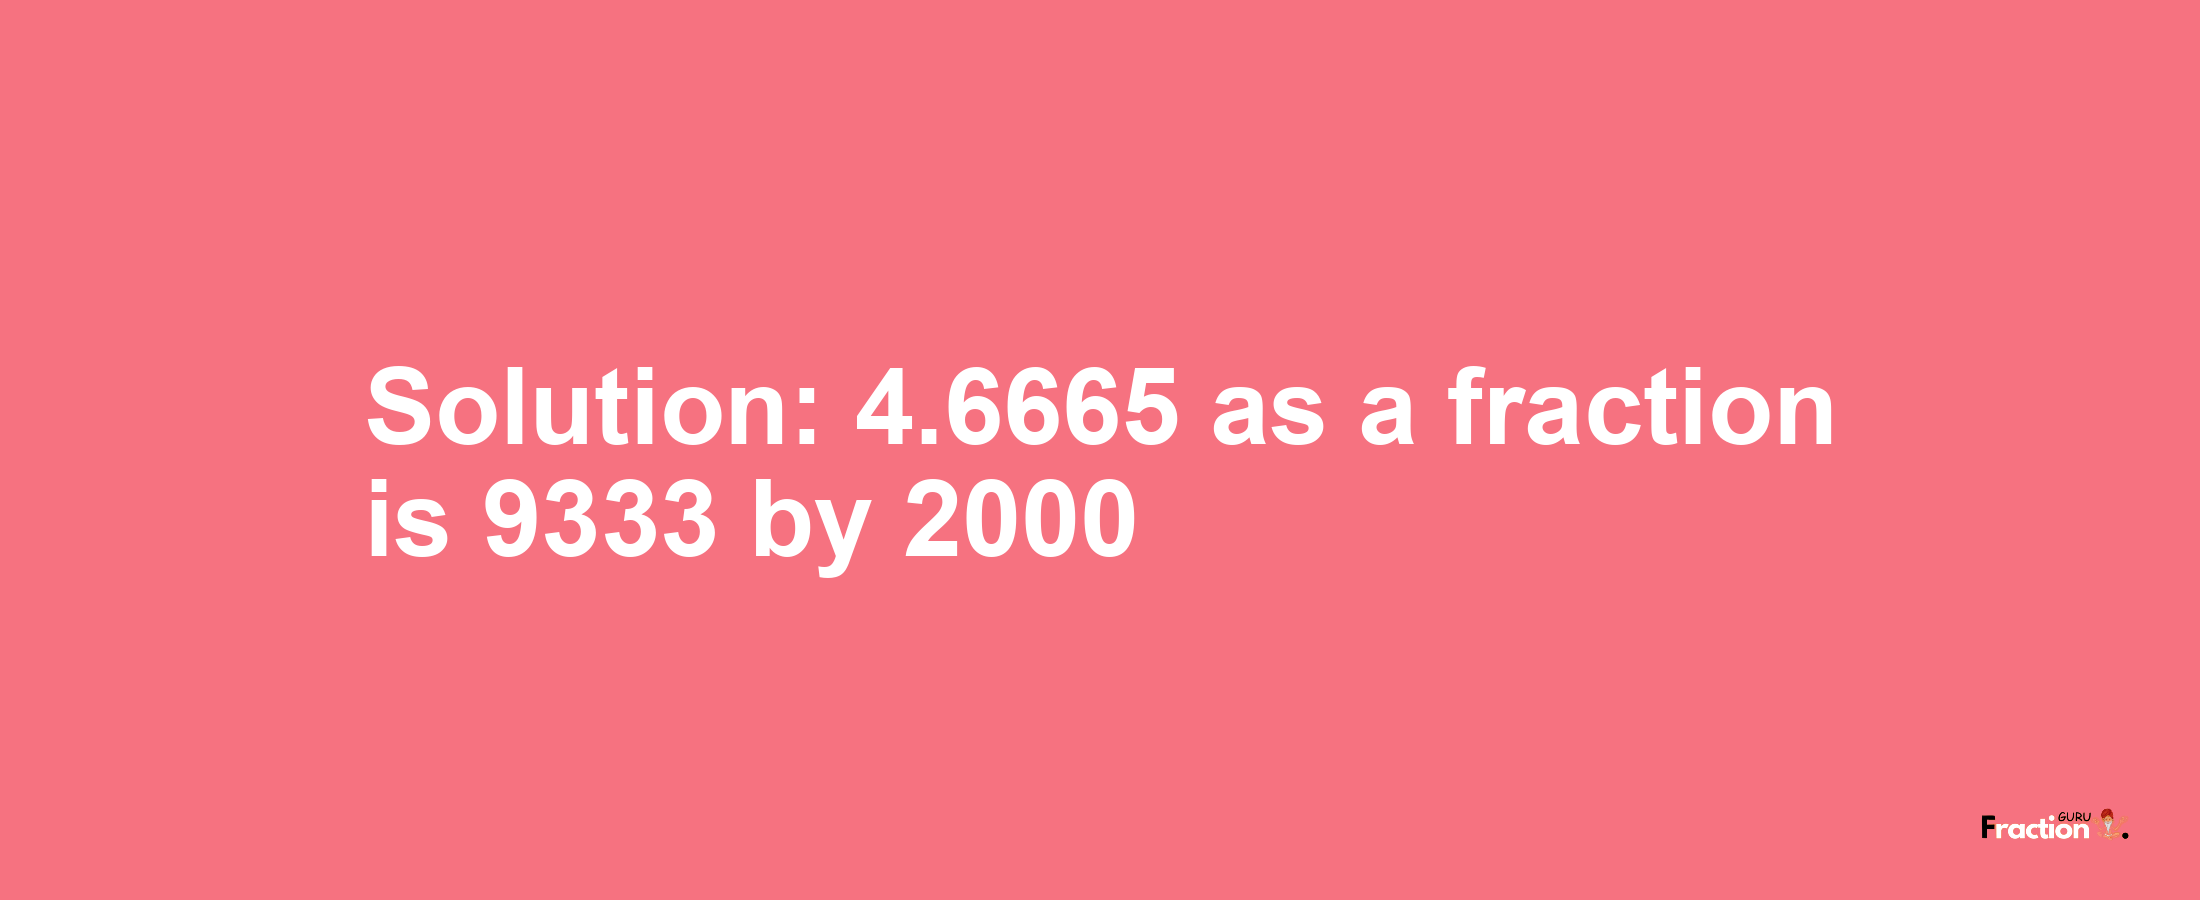 Solution:4.6665 as a fraction is 9333/2000